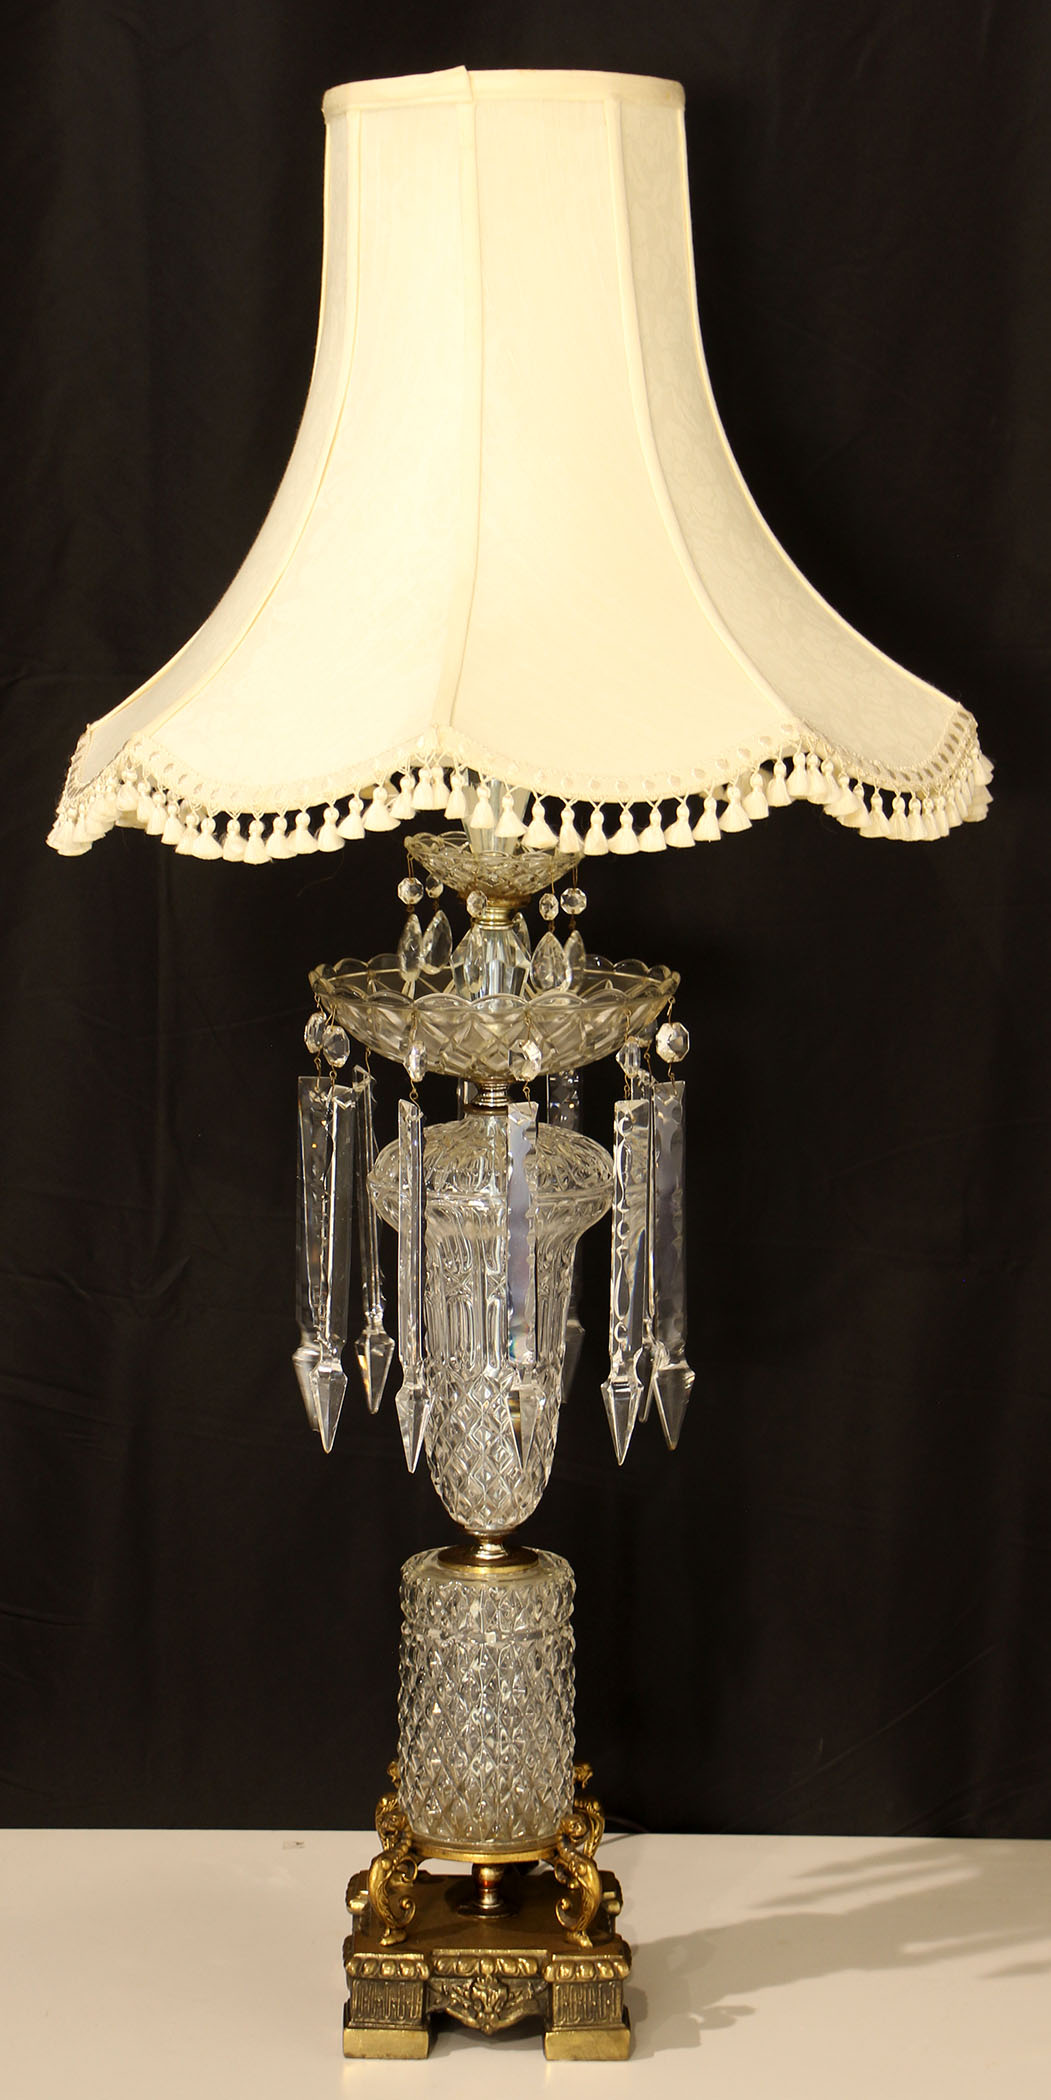 Vintage Austrian Table Lamp Sale in CT | Furniture and Home Design